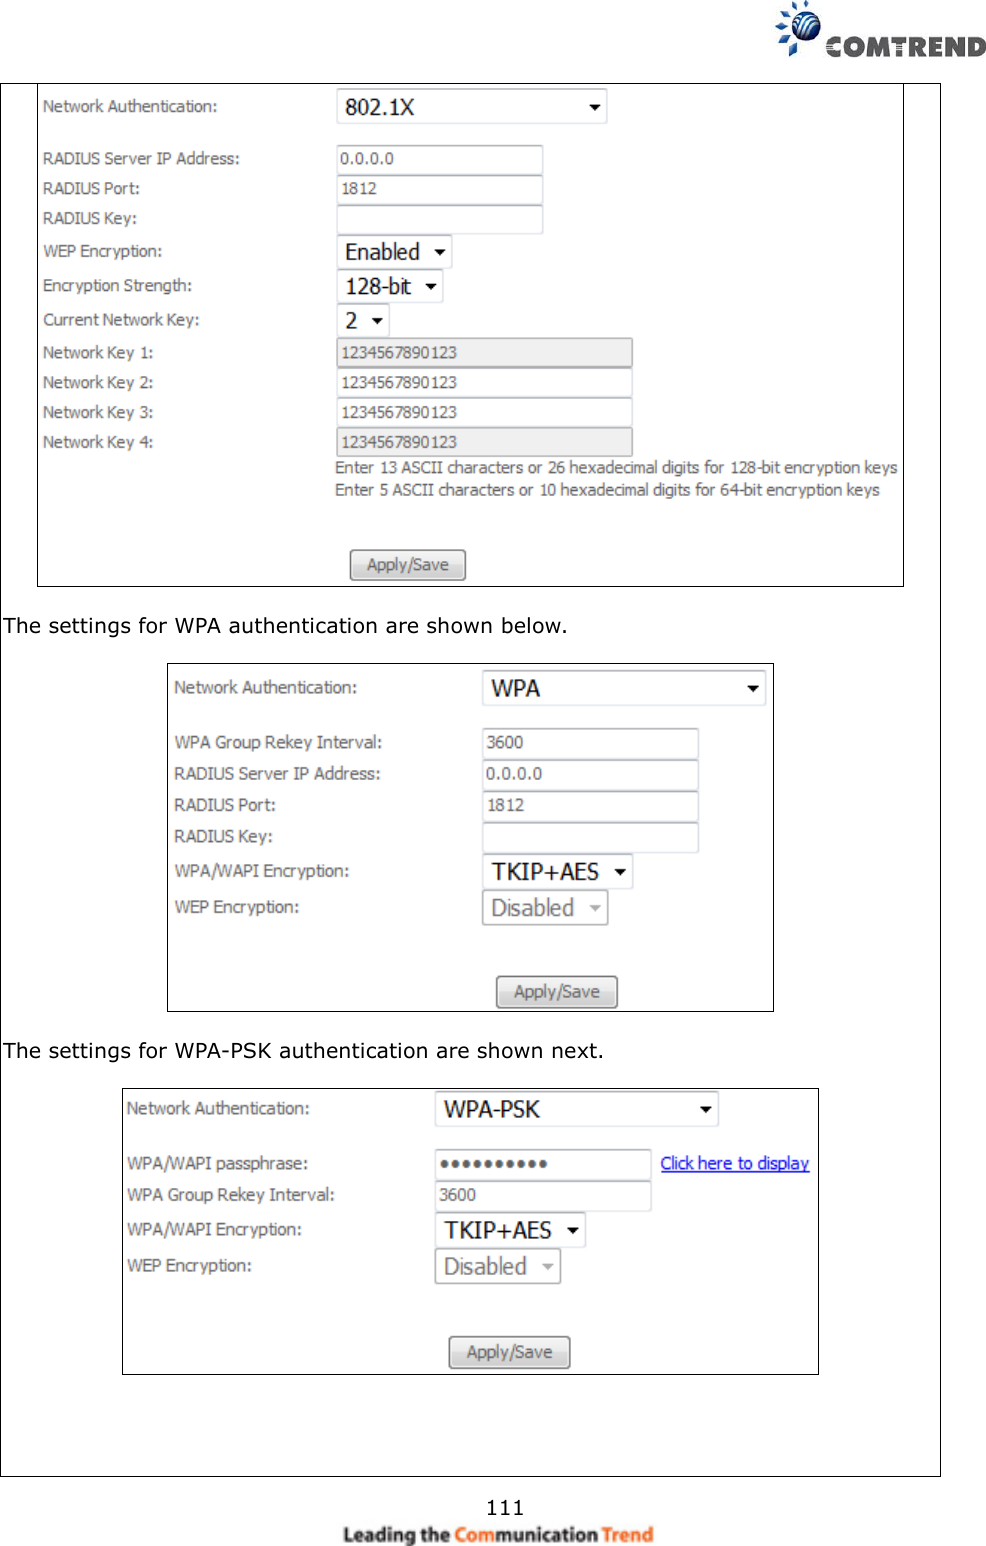     111   The settings for WPA authentication are shown below.    The settings for WPA-PSK authentication are shown next.       